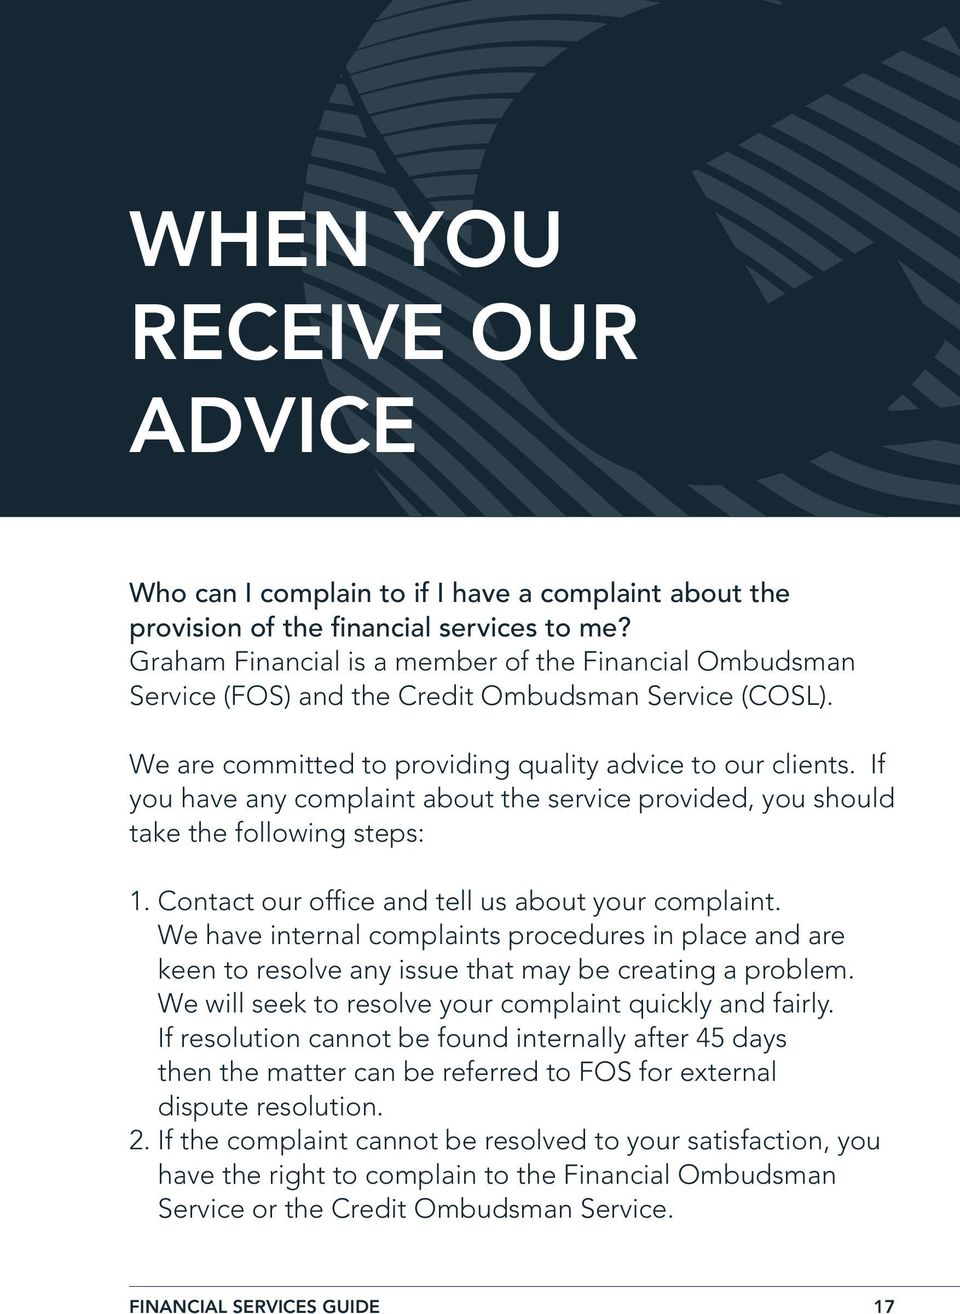 If you have any complaint about the service provided, you should take the following steps: 1. Contact our office and tell us about your complaint.